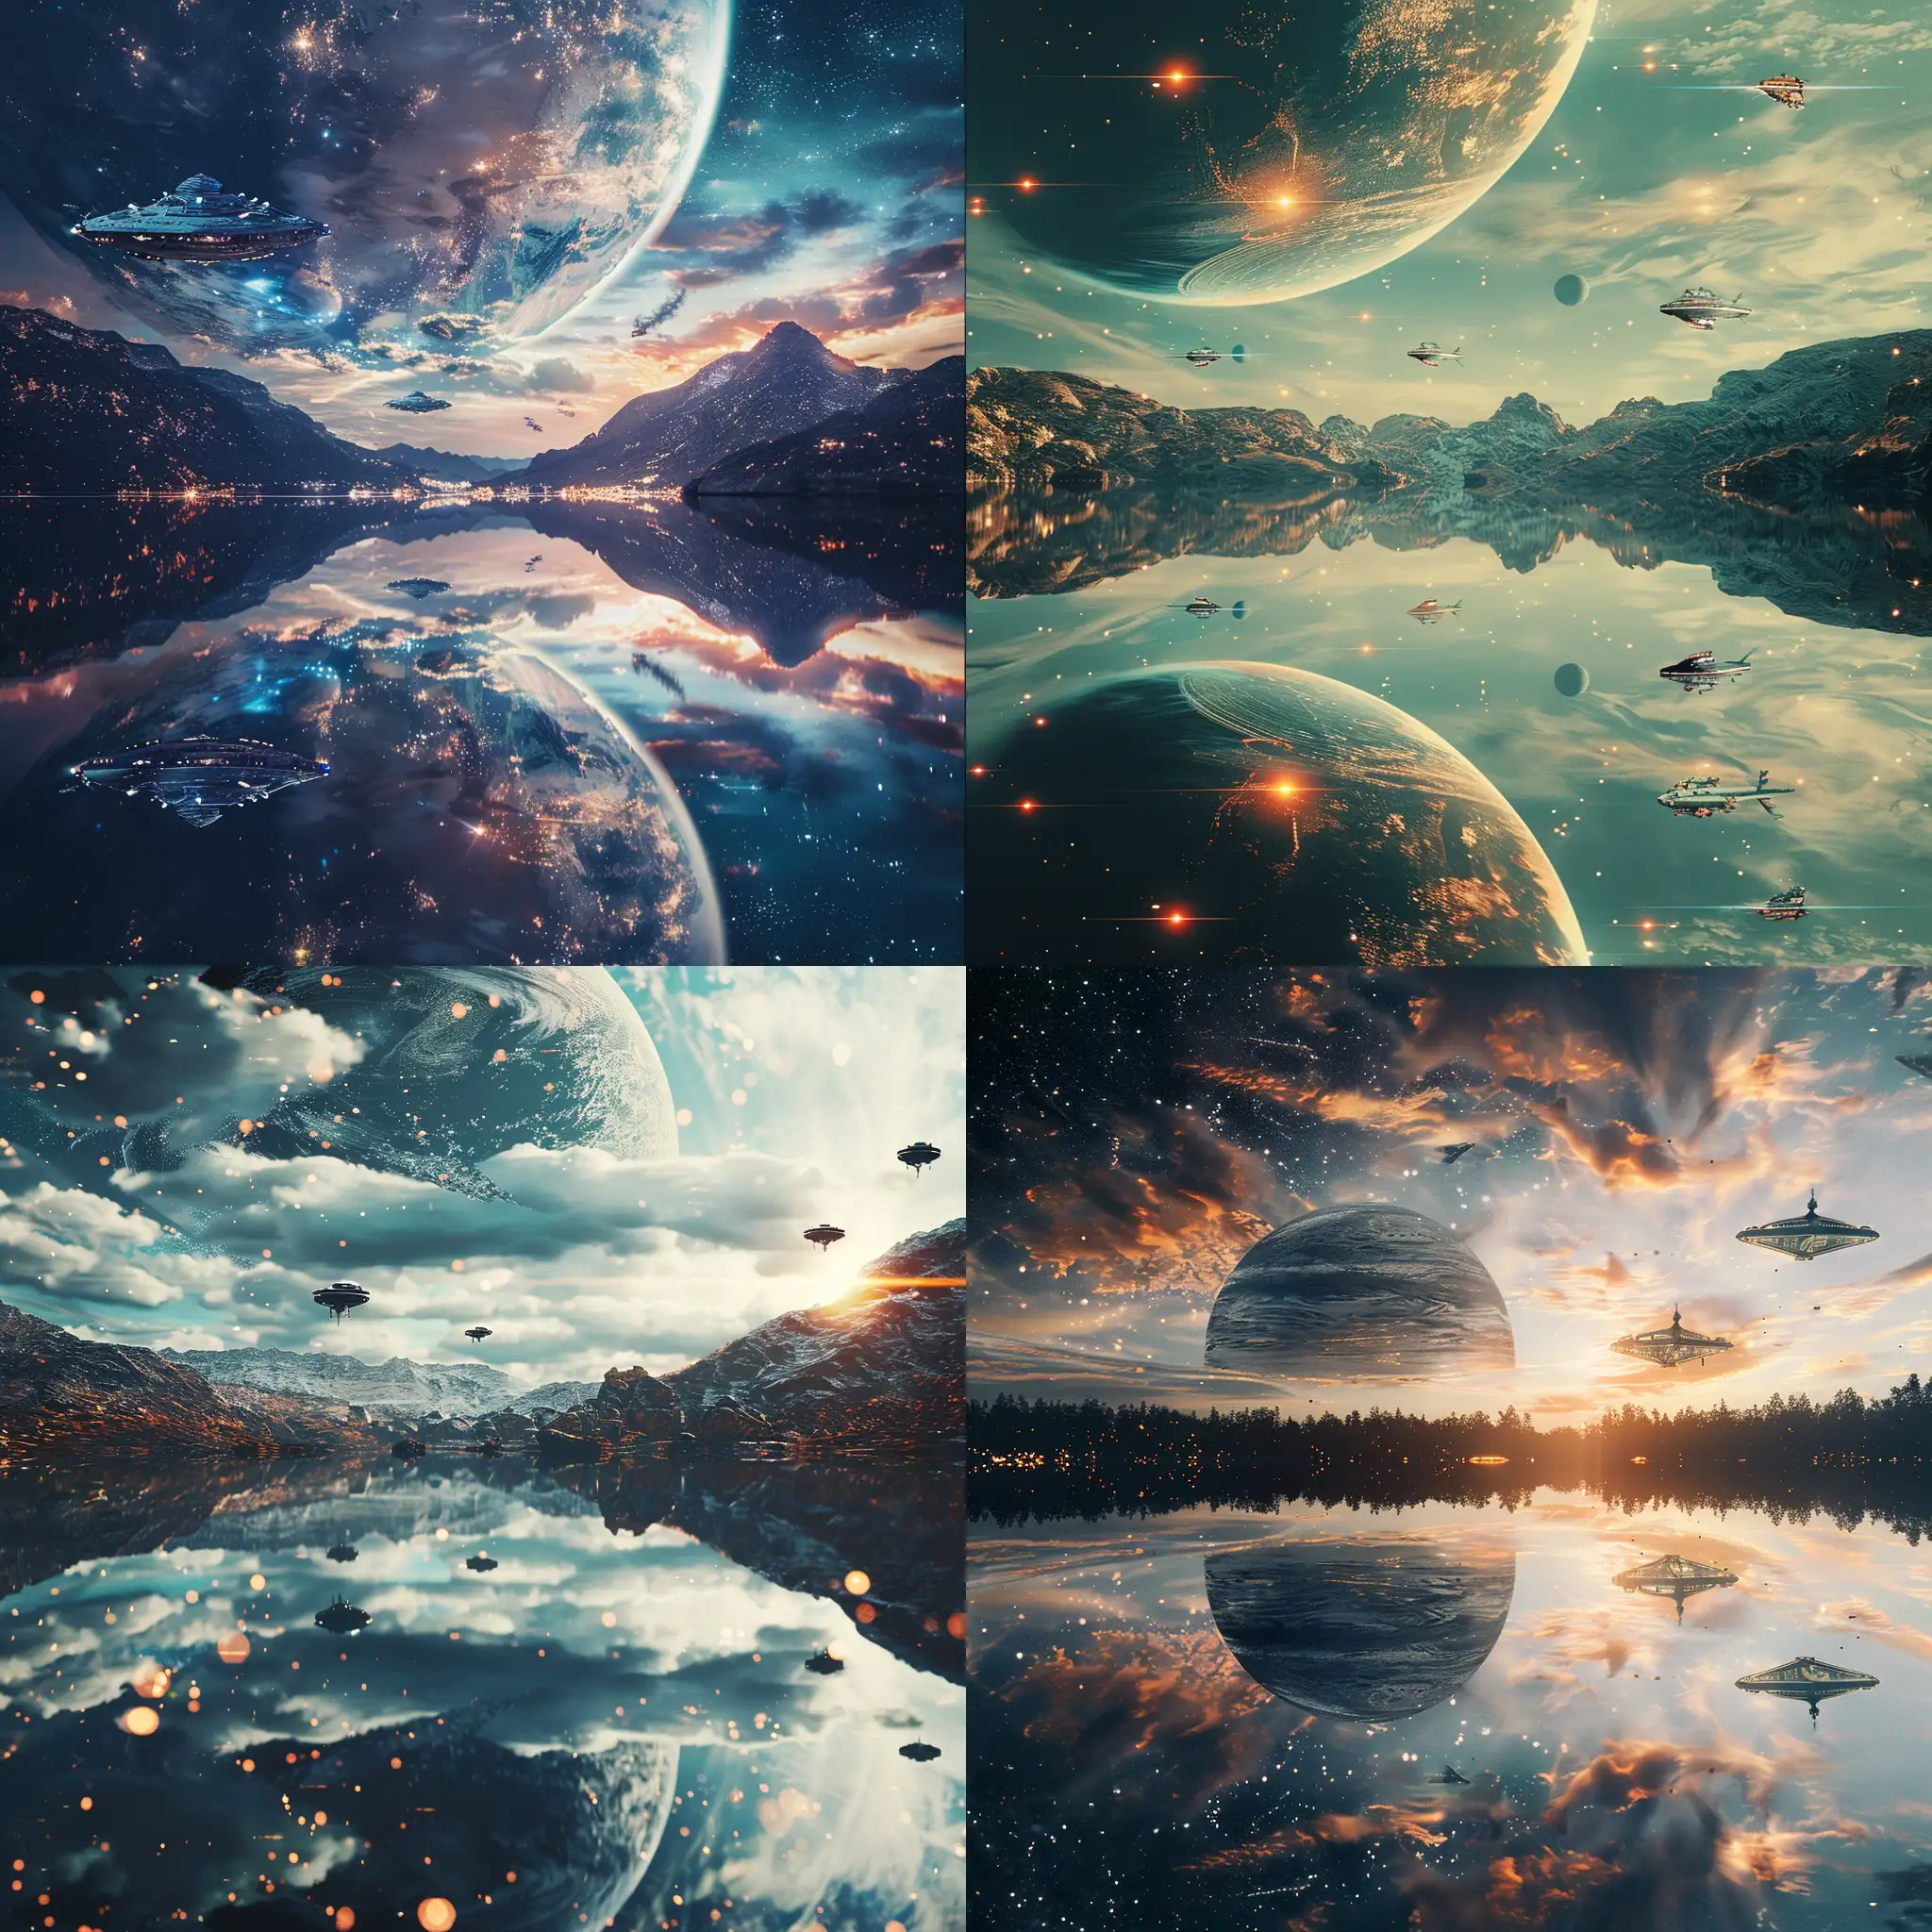 Cosmic-Landscape-with-Reflection-Lake-and-Spaceships-in-High-Resolution-Film-Photography